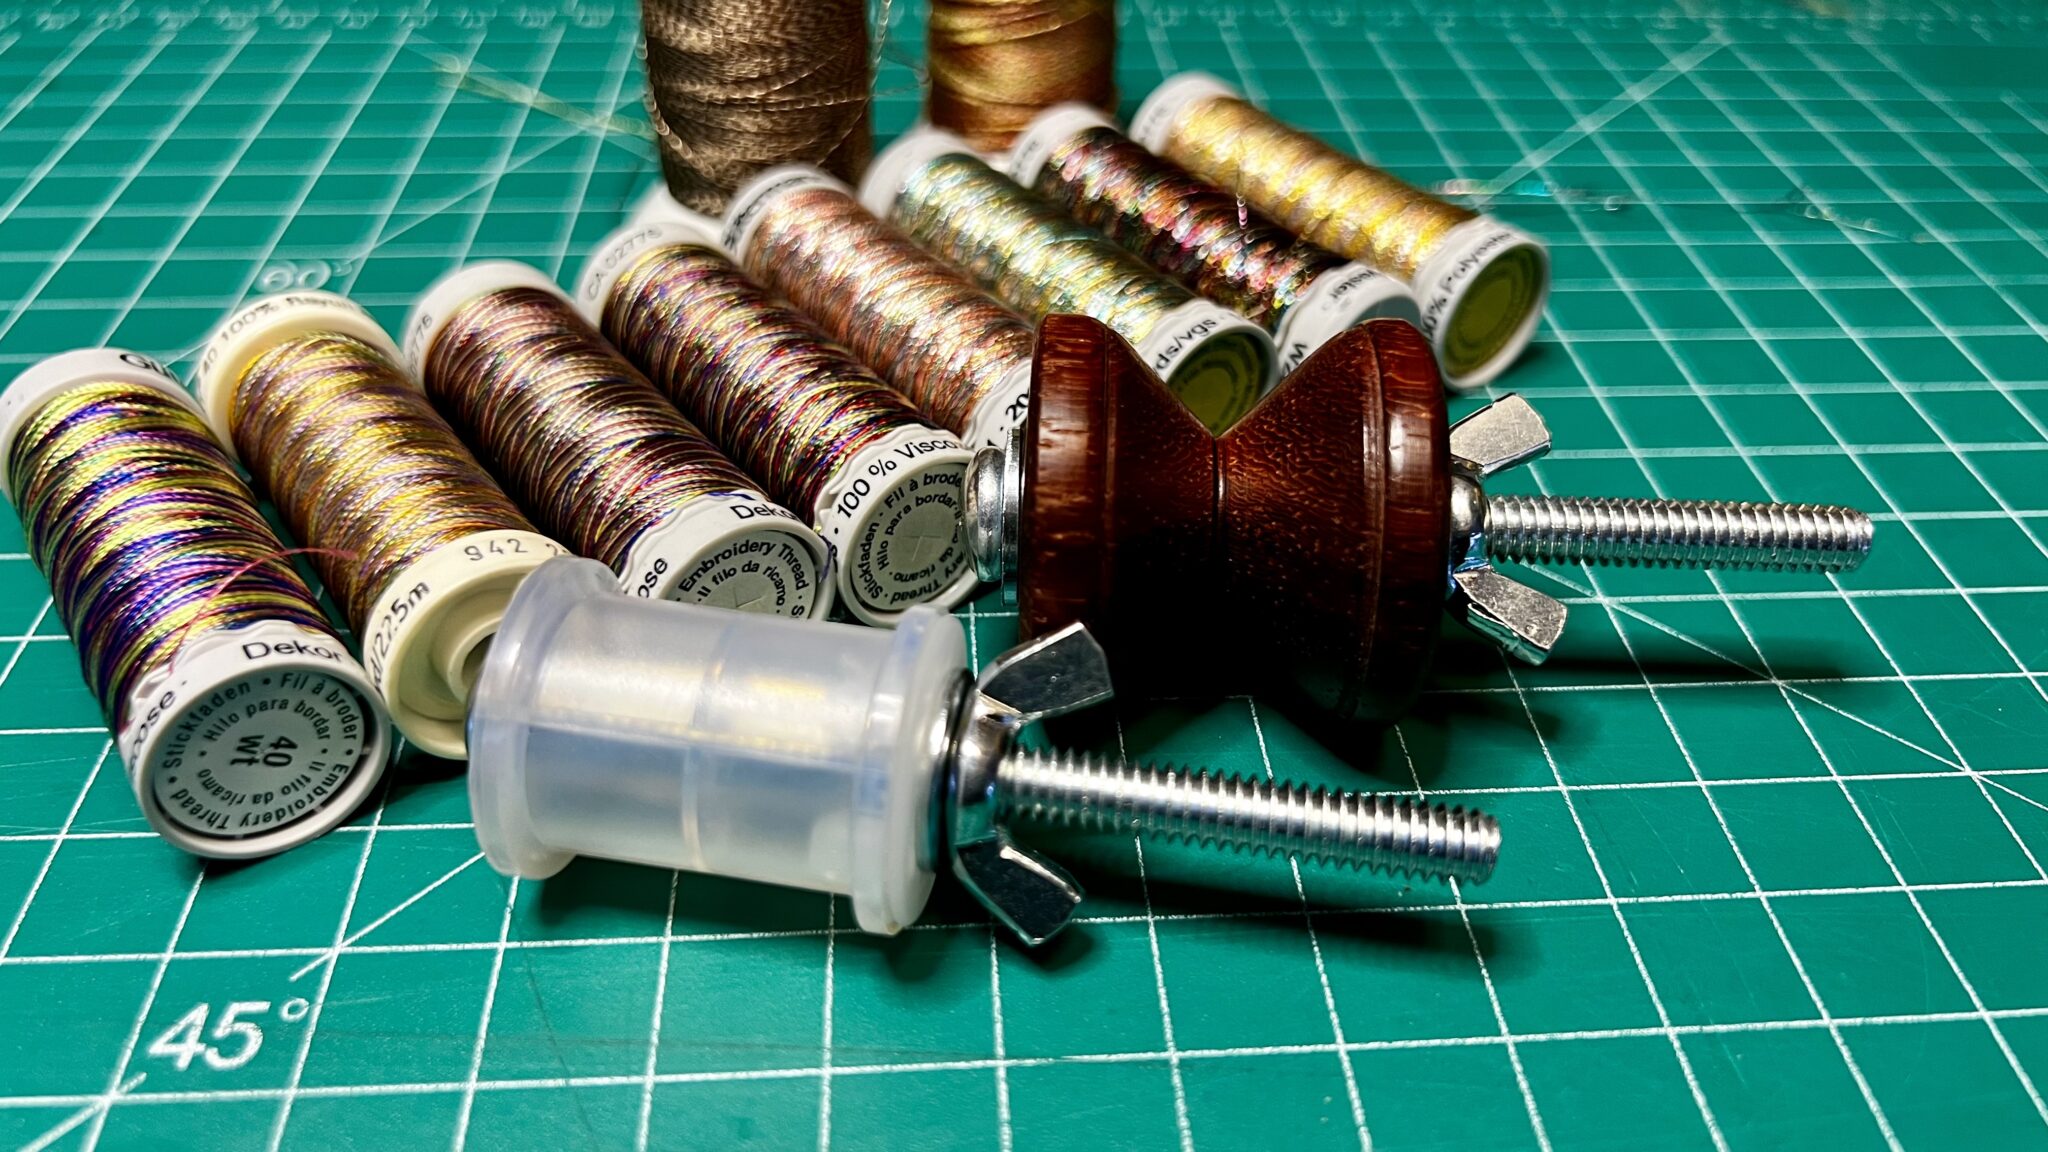 How to respool sewing embroidery thread for fly tying